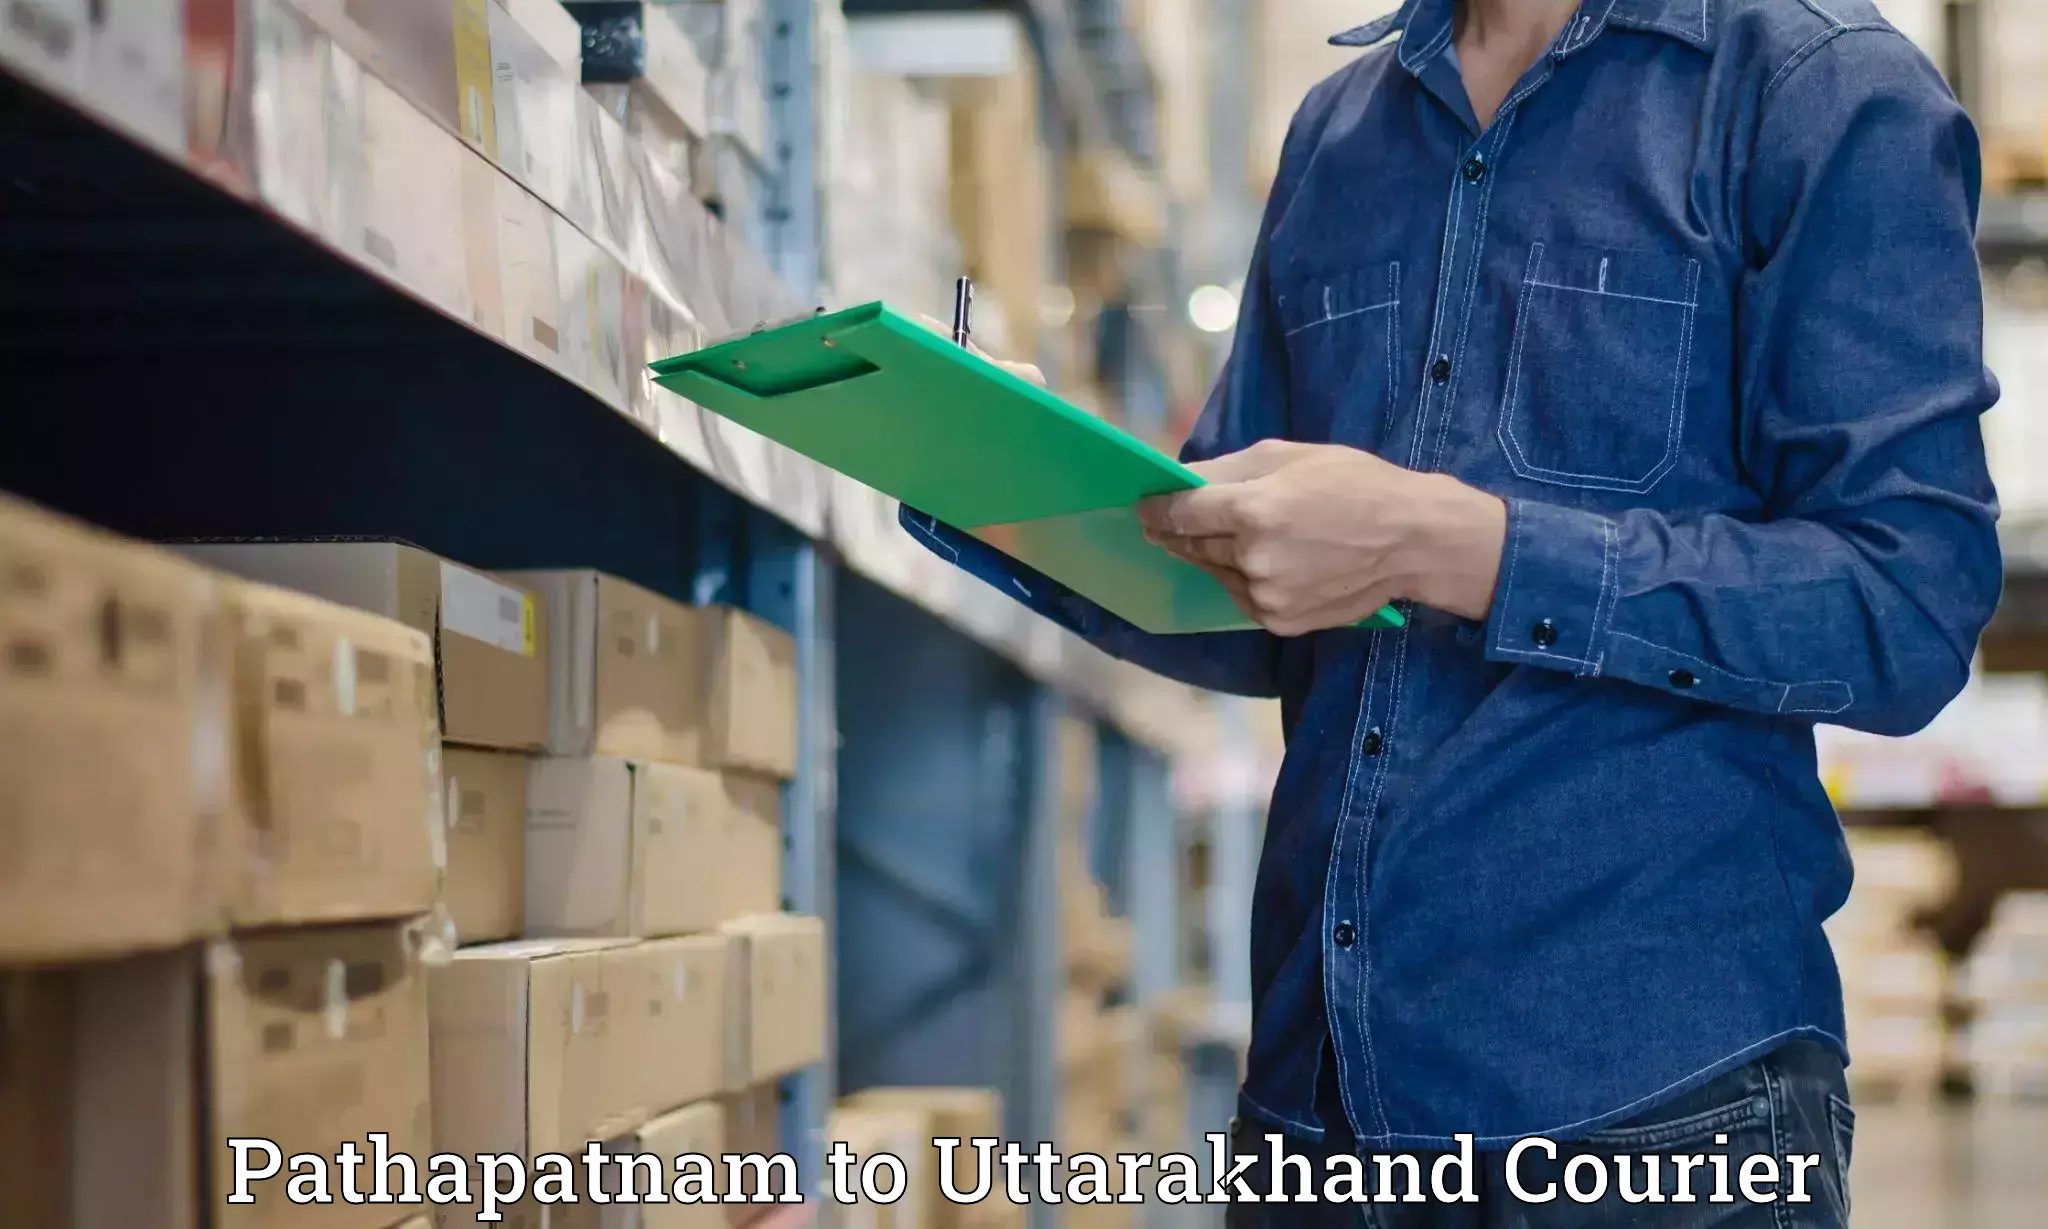 Express logistics in Pathapatnam to Kashipur